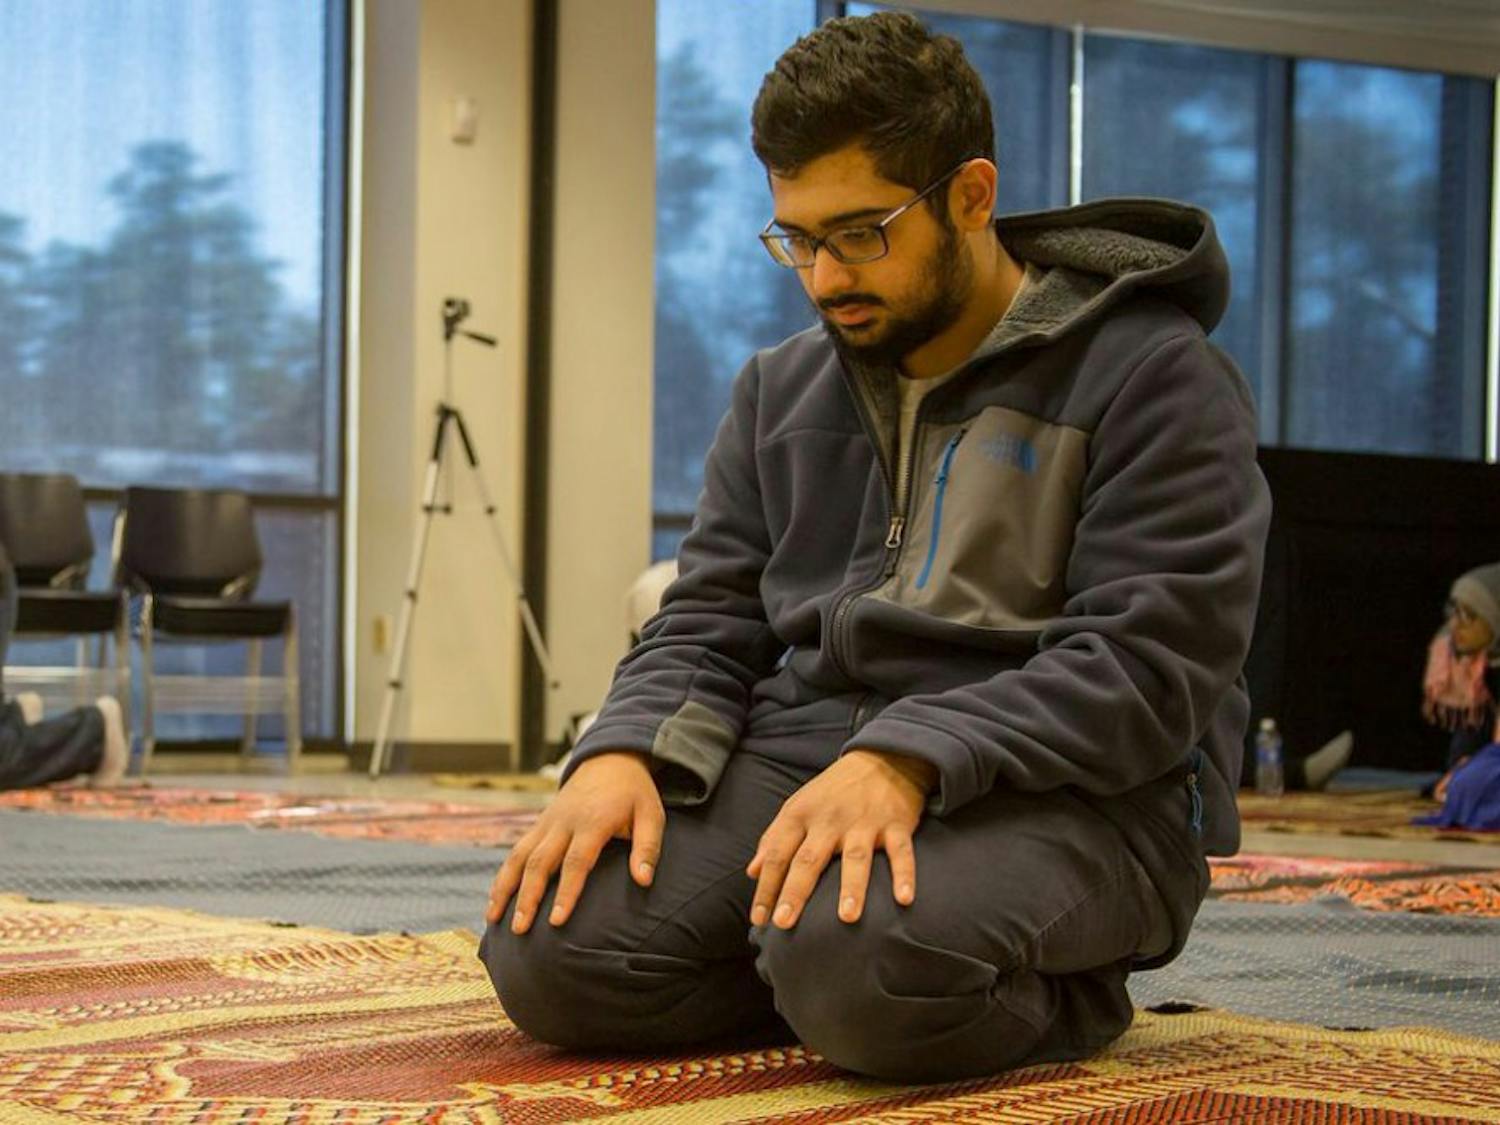 UNC sophomore Zeshan Bari prays during the UNC Muslim Students Association’s weekly prayer held every Friday in the Student Union annex.